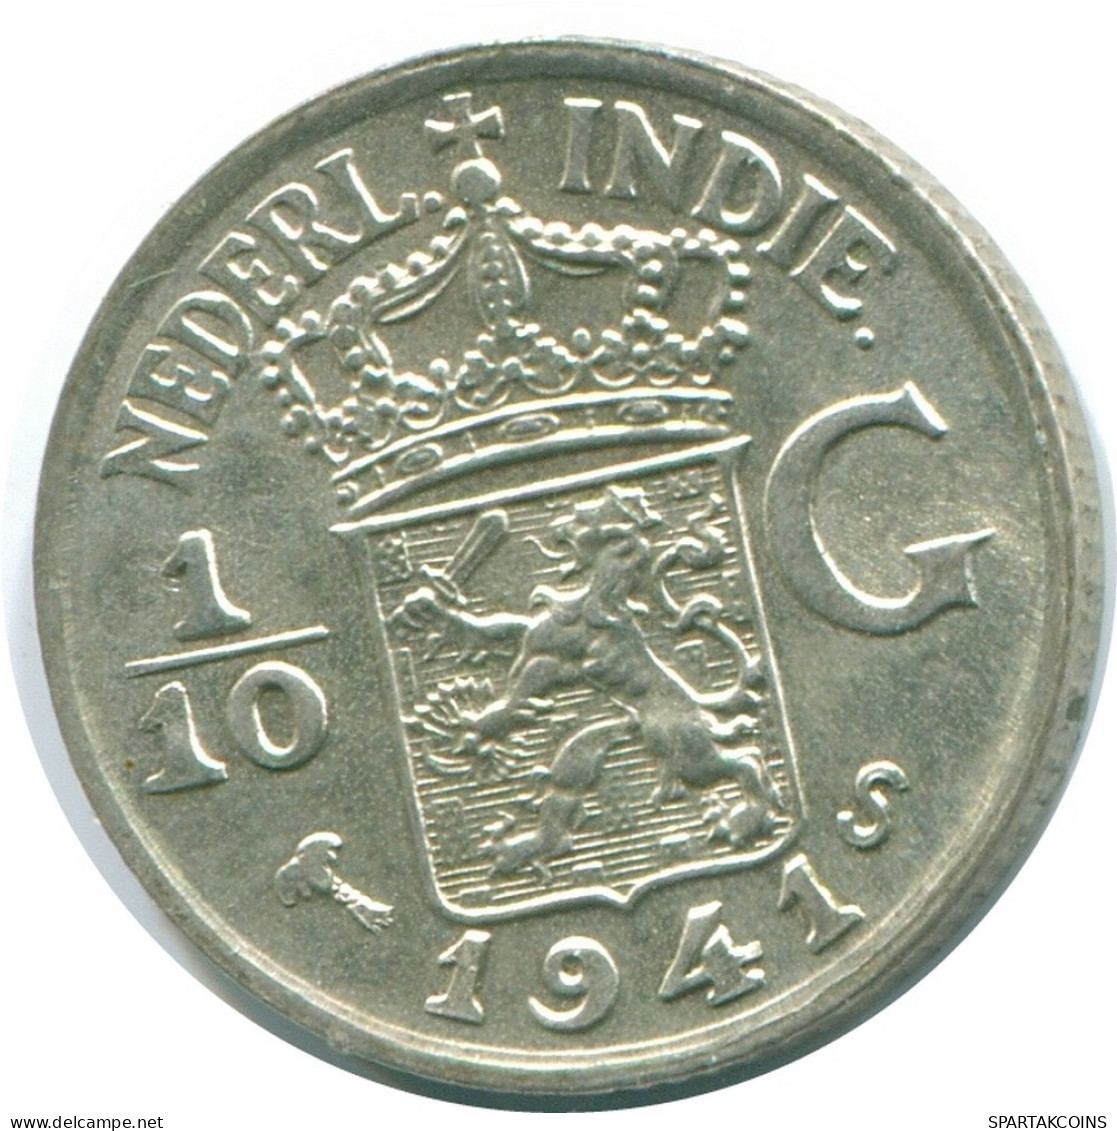 1/10 GULDEN 1941 S NETHERLANDS EAST INDIES SILVER Colonial Coin #NL13825.3.U.A - Indes Neerlandesas